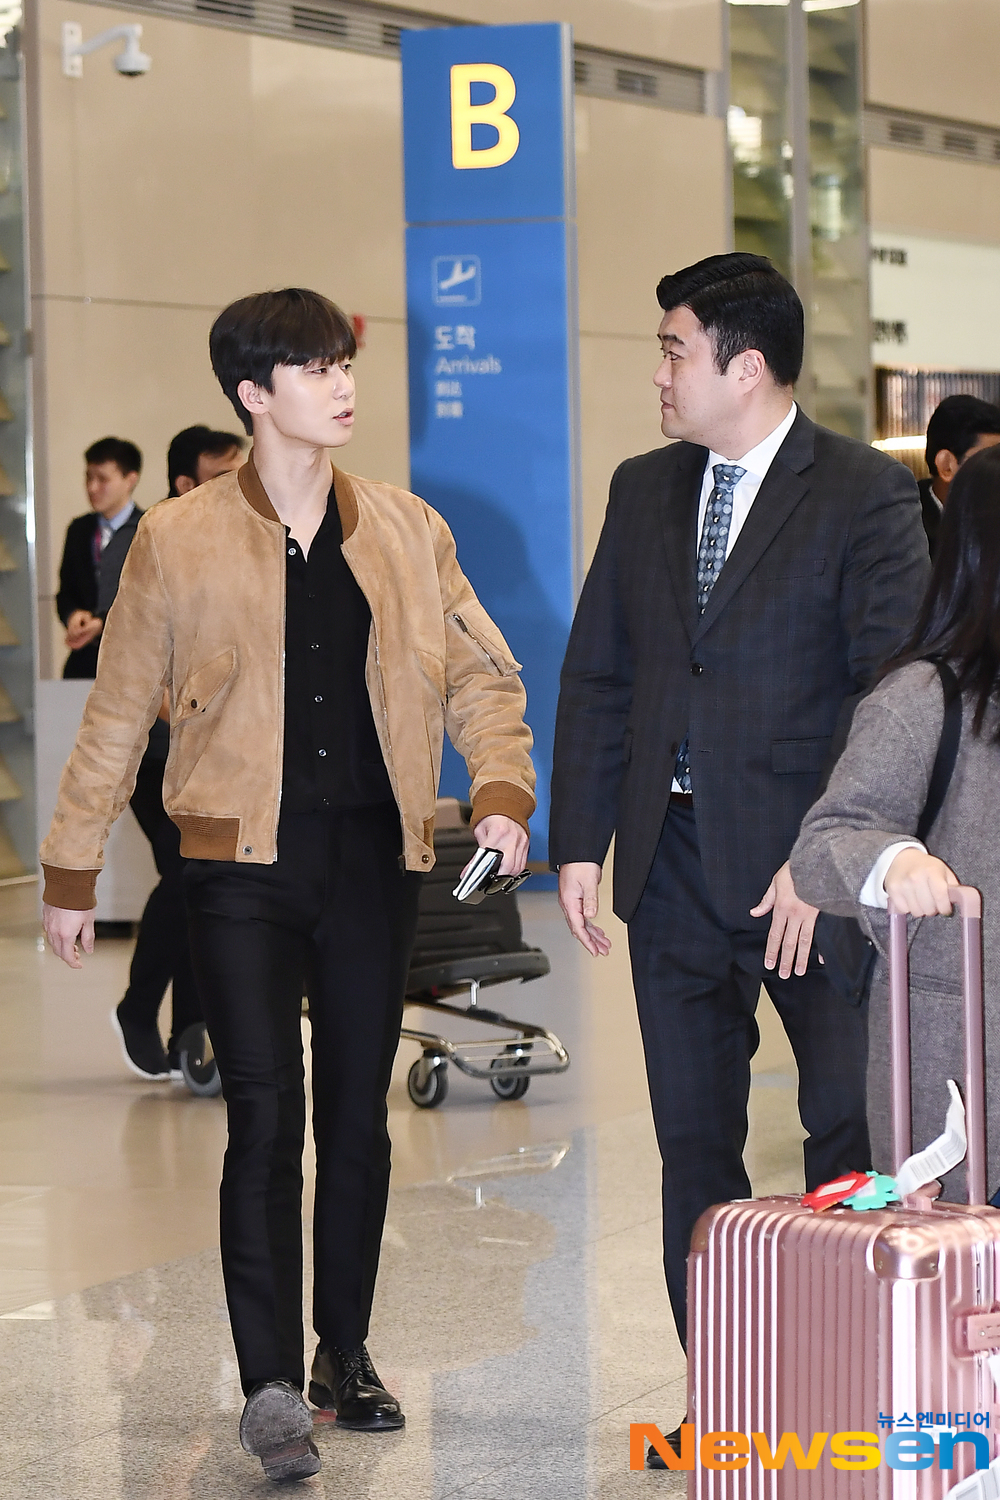 Actor Park Seo-joon arrived in Hong Kong through Incheon International Airport in Unseo-dong, Jung-gu, Incheon on the afternoon of March 18 after finishing the schedule of the 13th Asian Film Awards (2019: AFA) awards ceremony.exponential earthquake